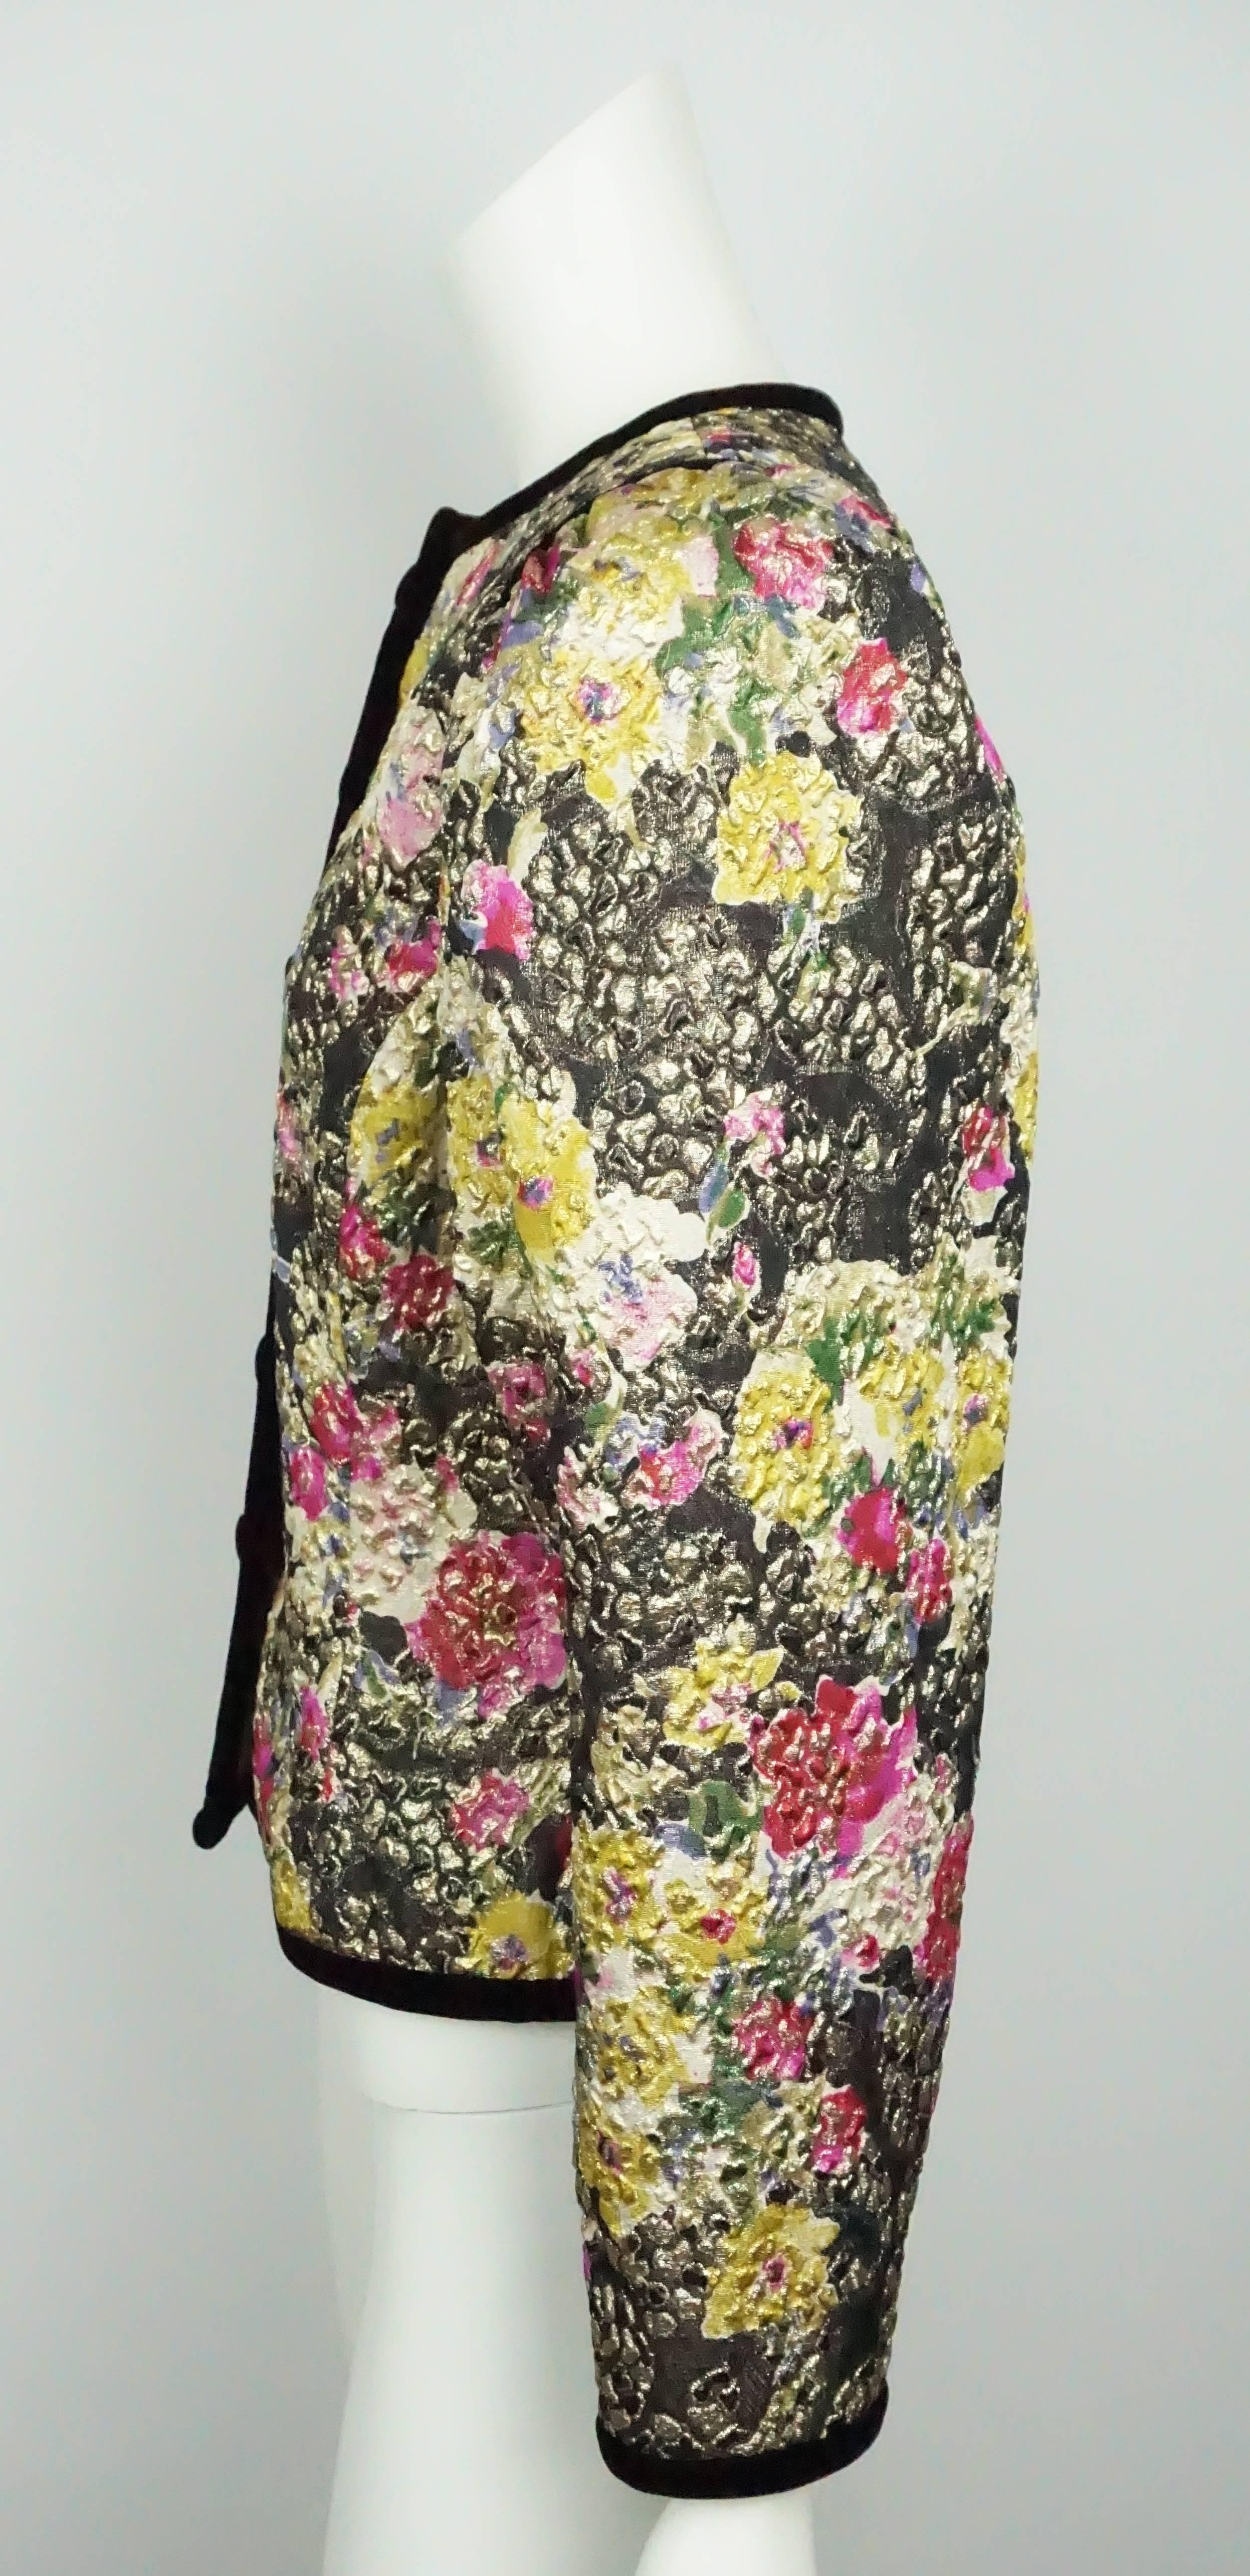 Oscar De La Renta Multi Metallic Floral Brocade Jacket w/ Black Trim - 8  This stunning vintage piece is in excellent condition. The jacket has a floral design that has a brocade effect. The jacket has trimming in black velvet and is lined in silk